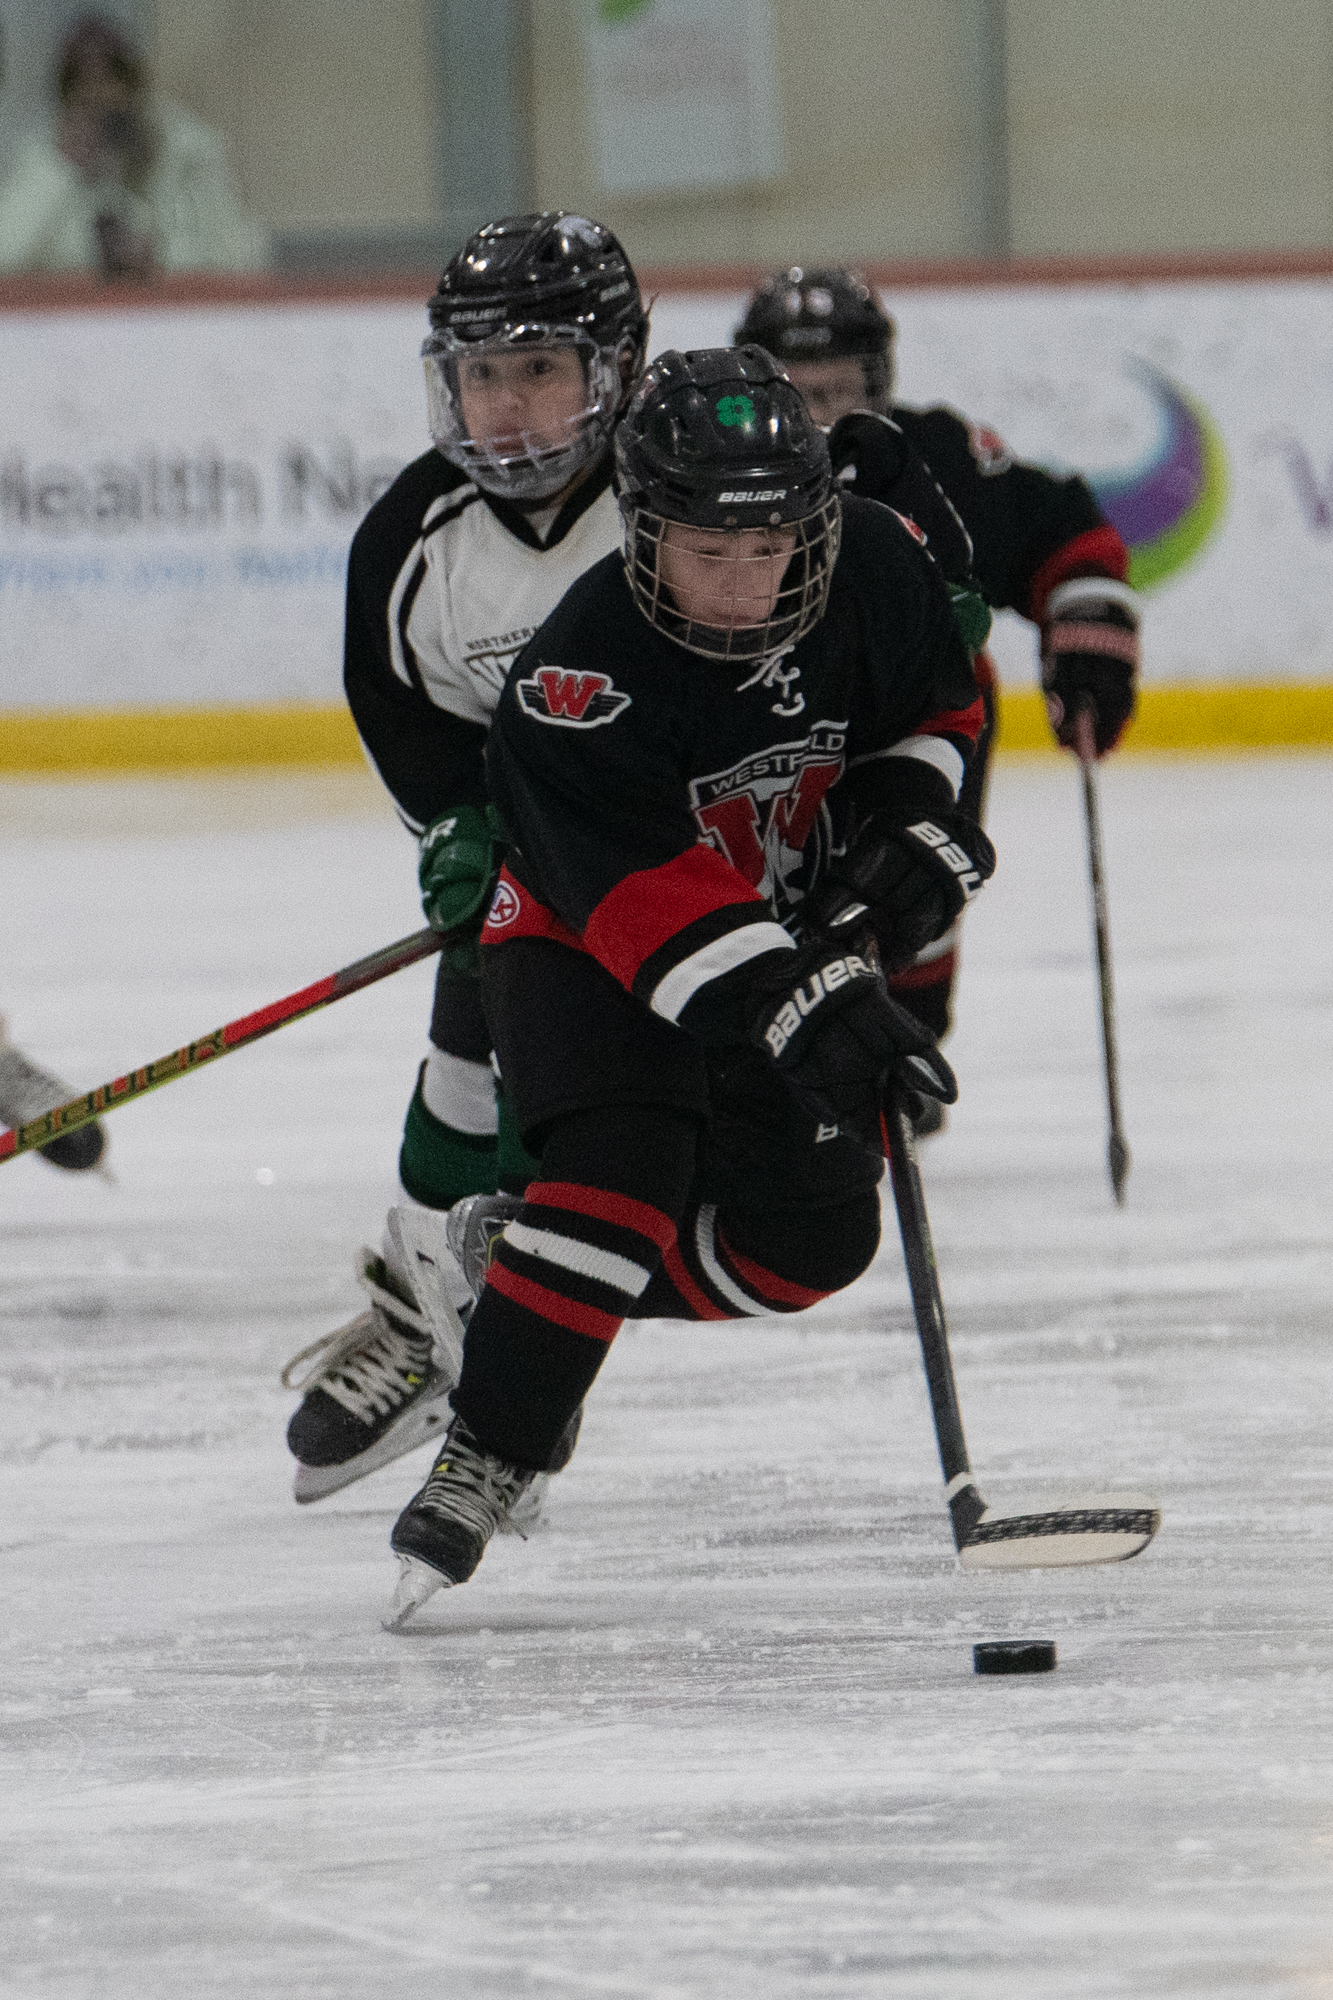 The Westfield Junior Bombers Red battle the Northern Rhode Island Vikings in a Westfield Youth Hockey Fire & Ice Tournament game Sunday at Amelia Park Arena. The game ended in a 2-2 tie. (Bill Deren / The Westfield News)